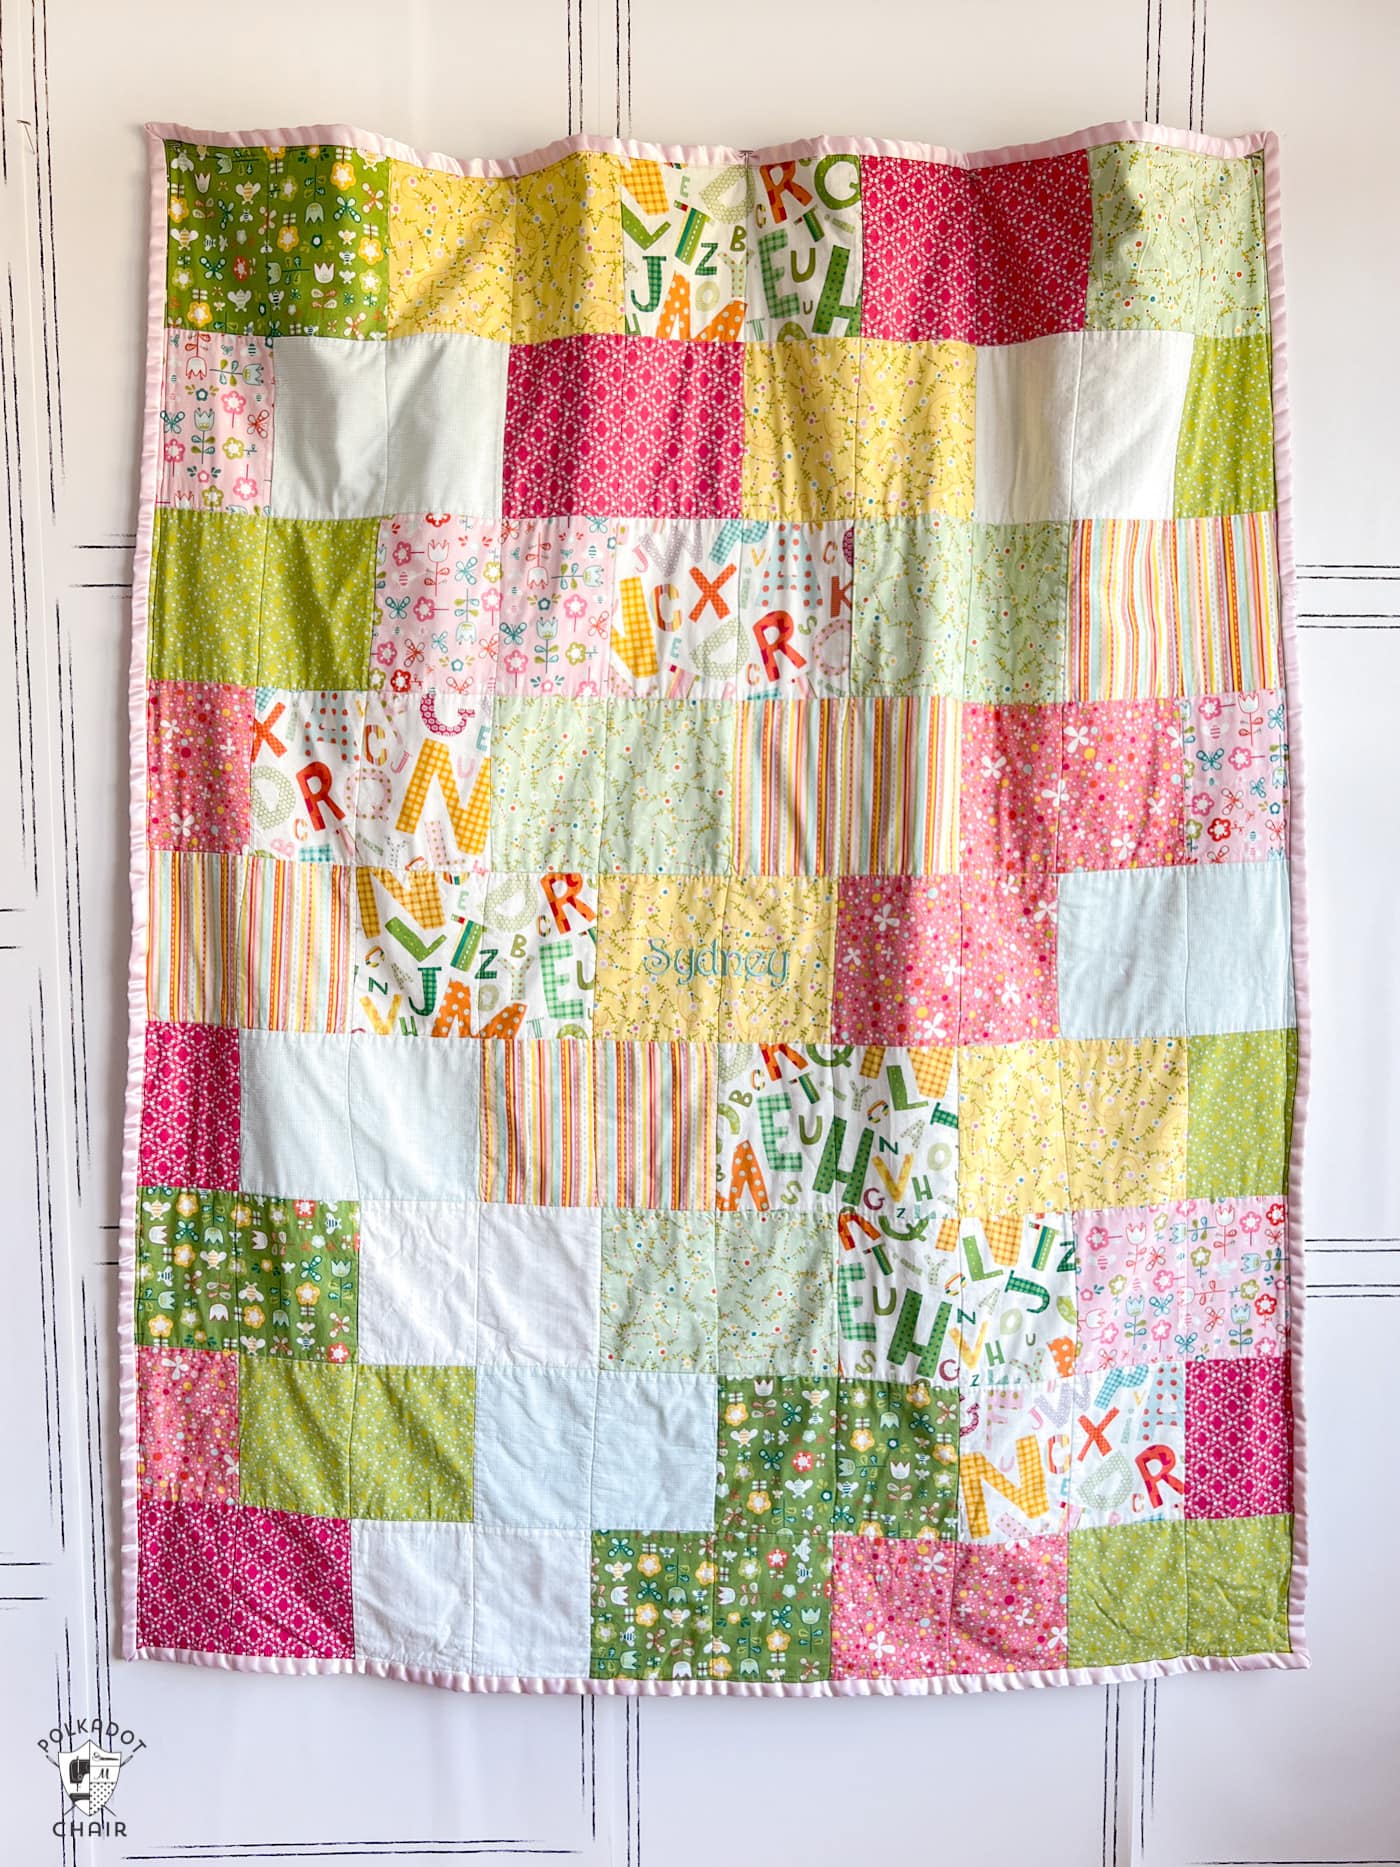 pink, green, yellow and red quilt hanging on wall